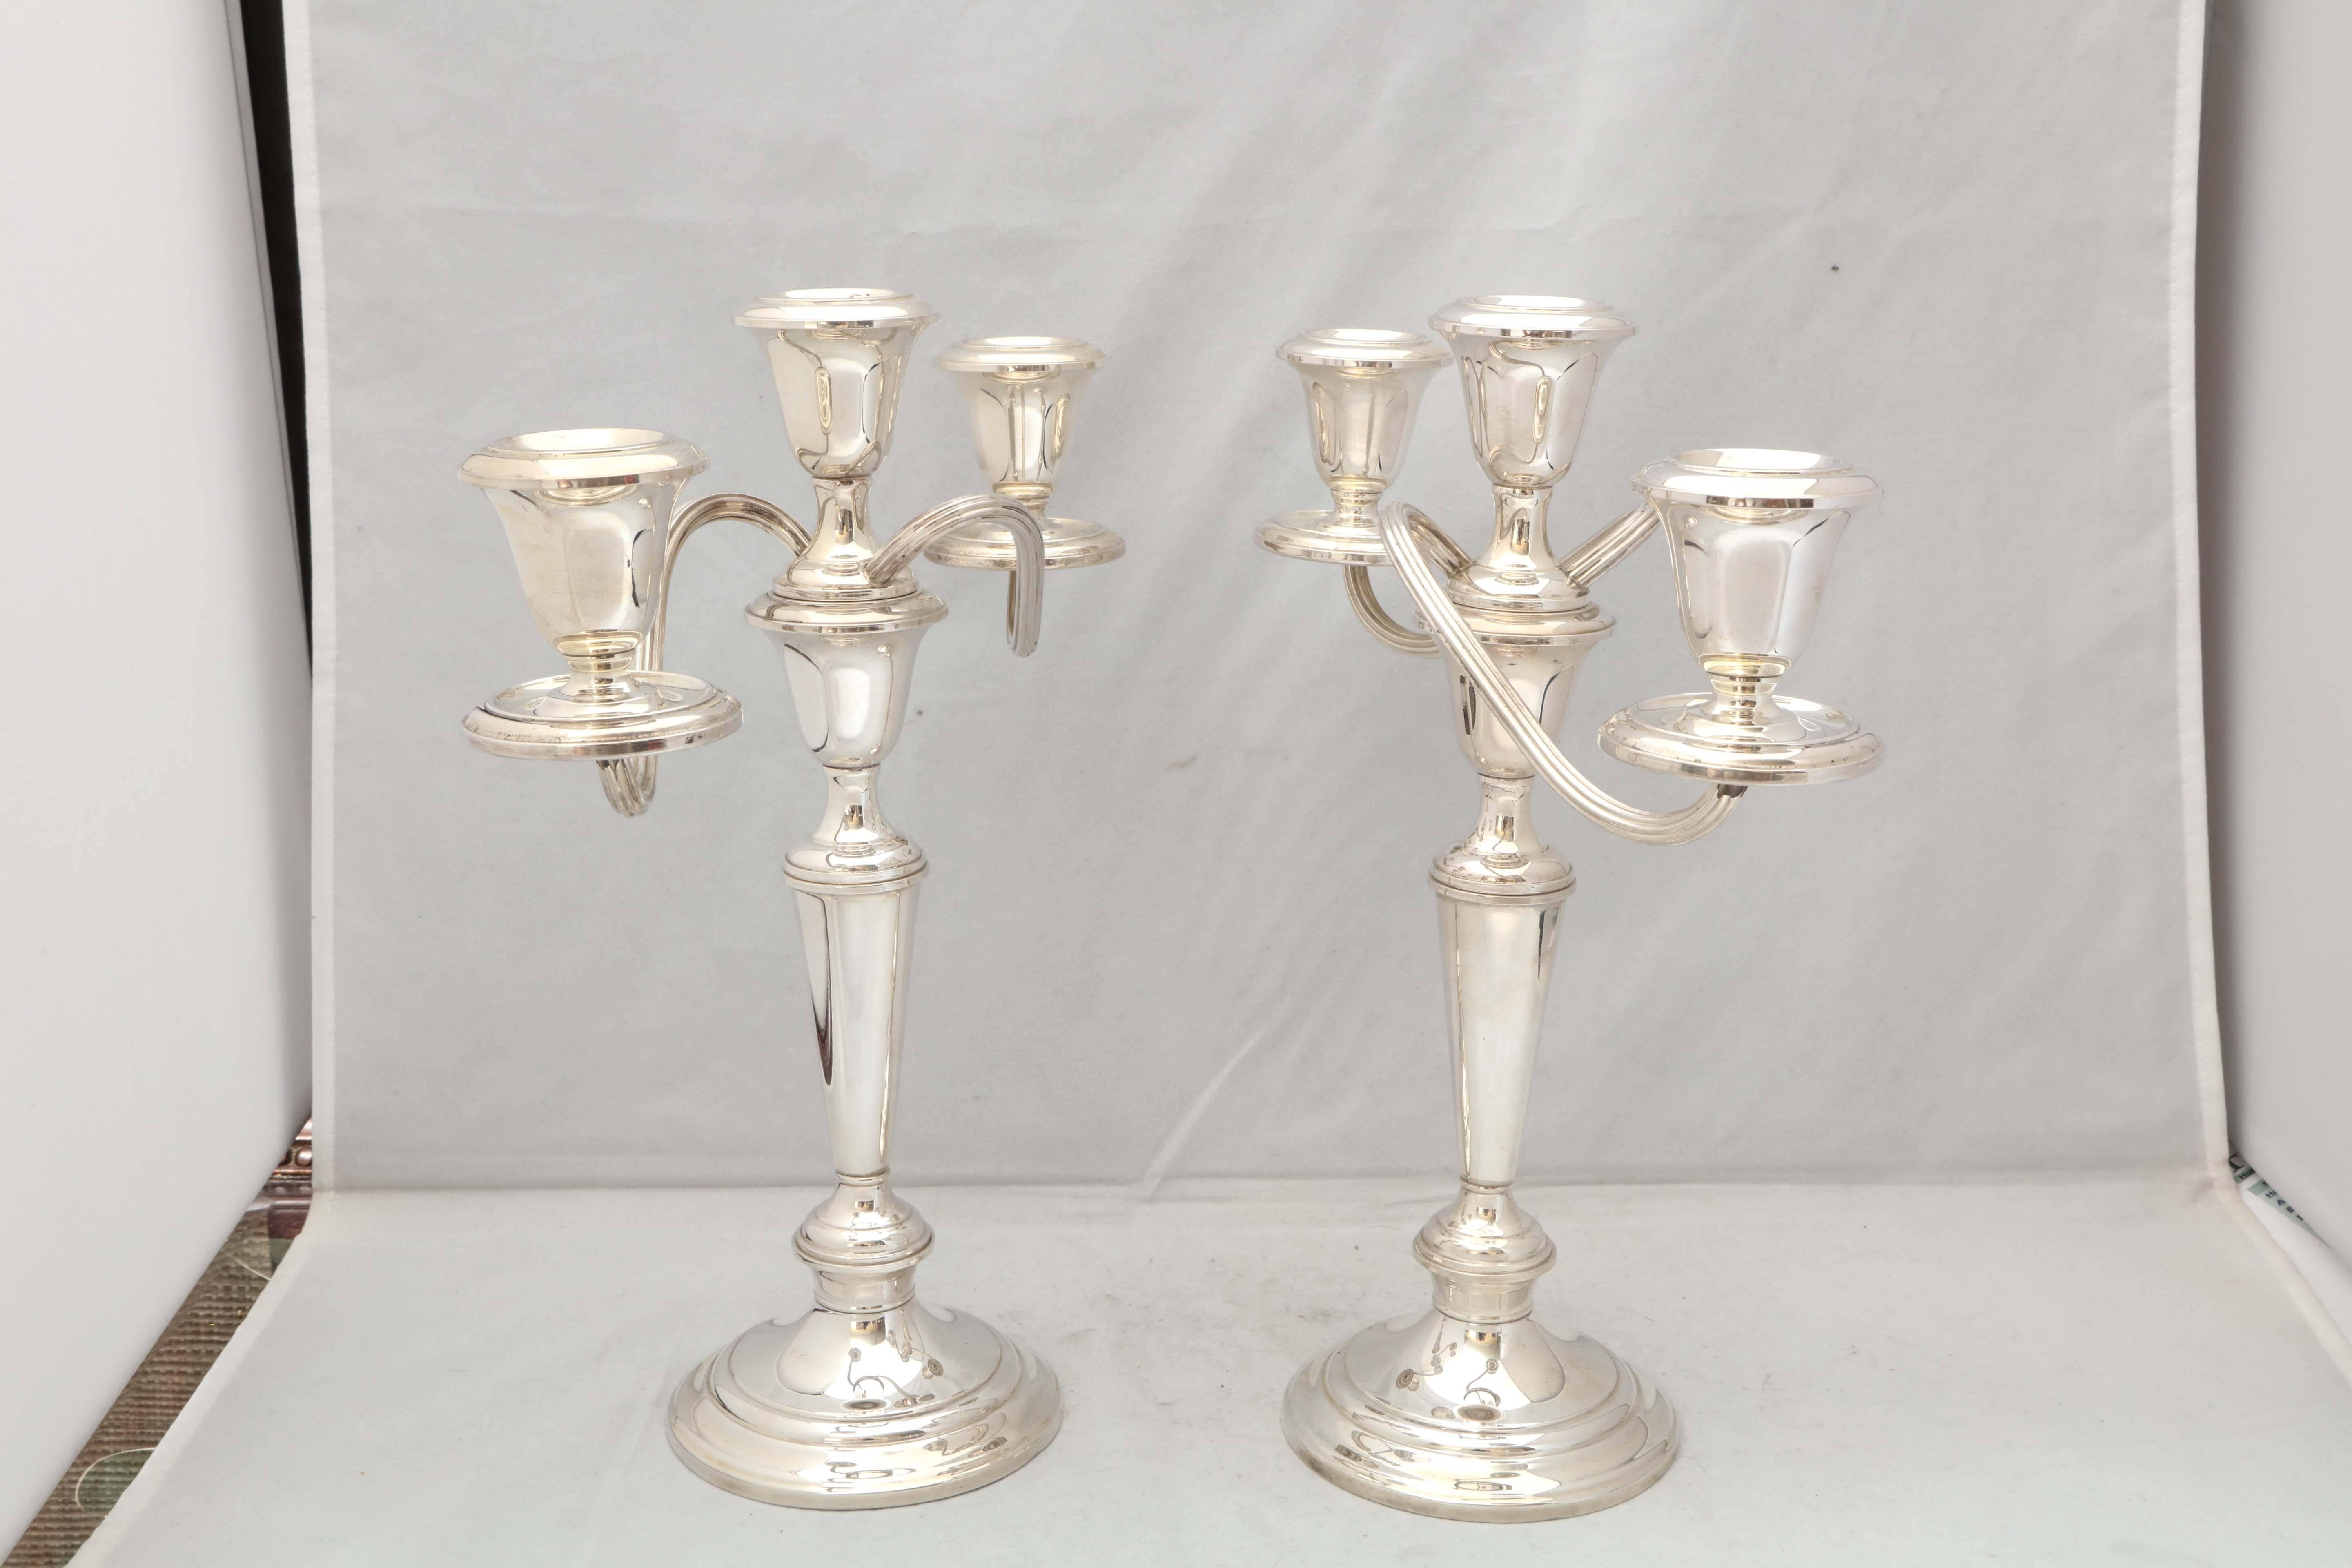 Pair of Empire style, sterling silver candelabra, The Gorham Manufacturing Co., Providence, Rhode Island, circa 1930s. Each candelabrum separates into three parts to form three different sizes of candlesticks. The 